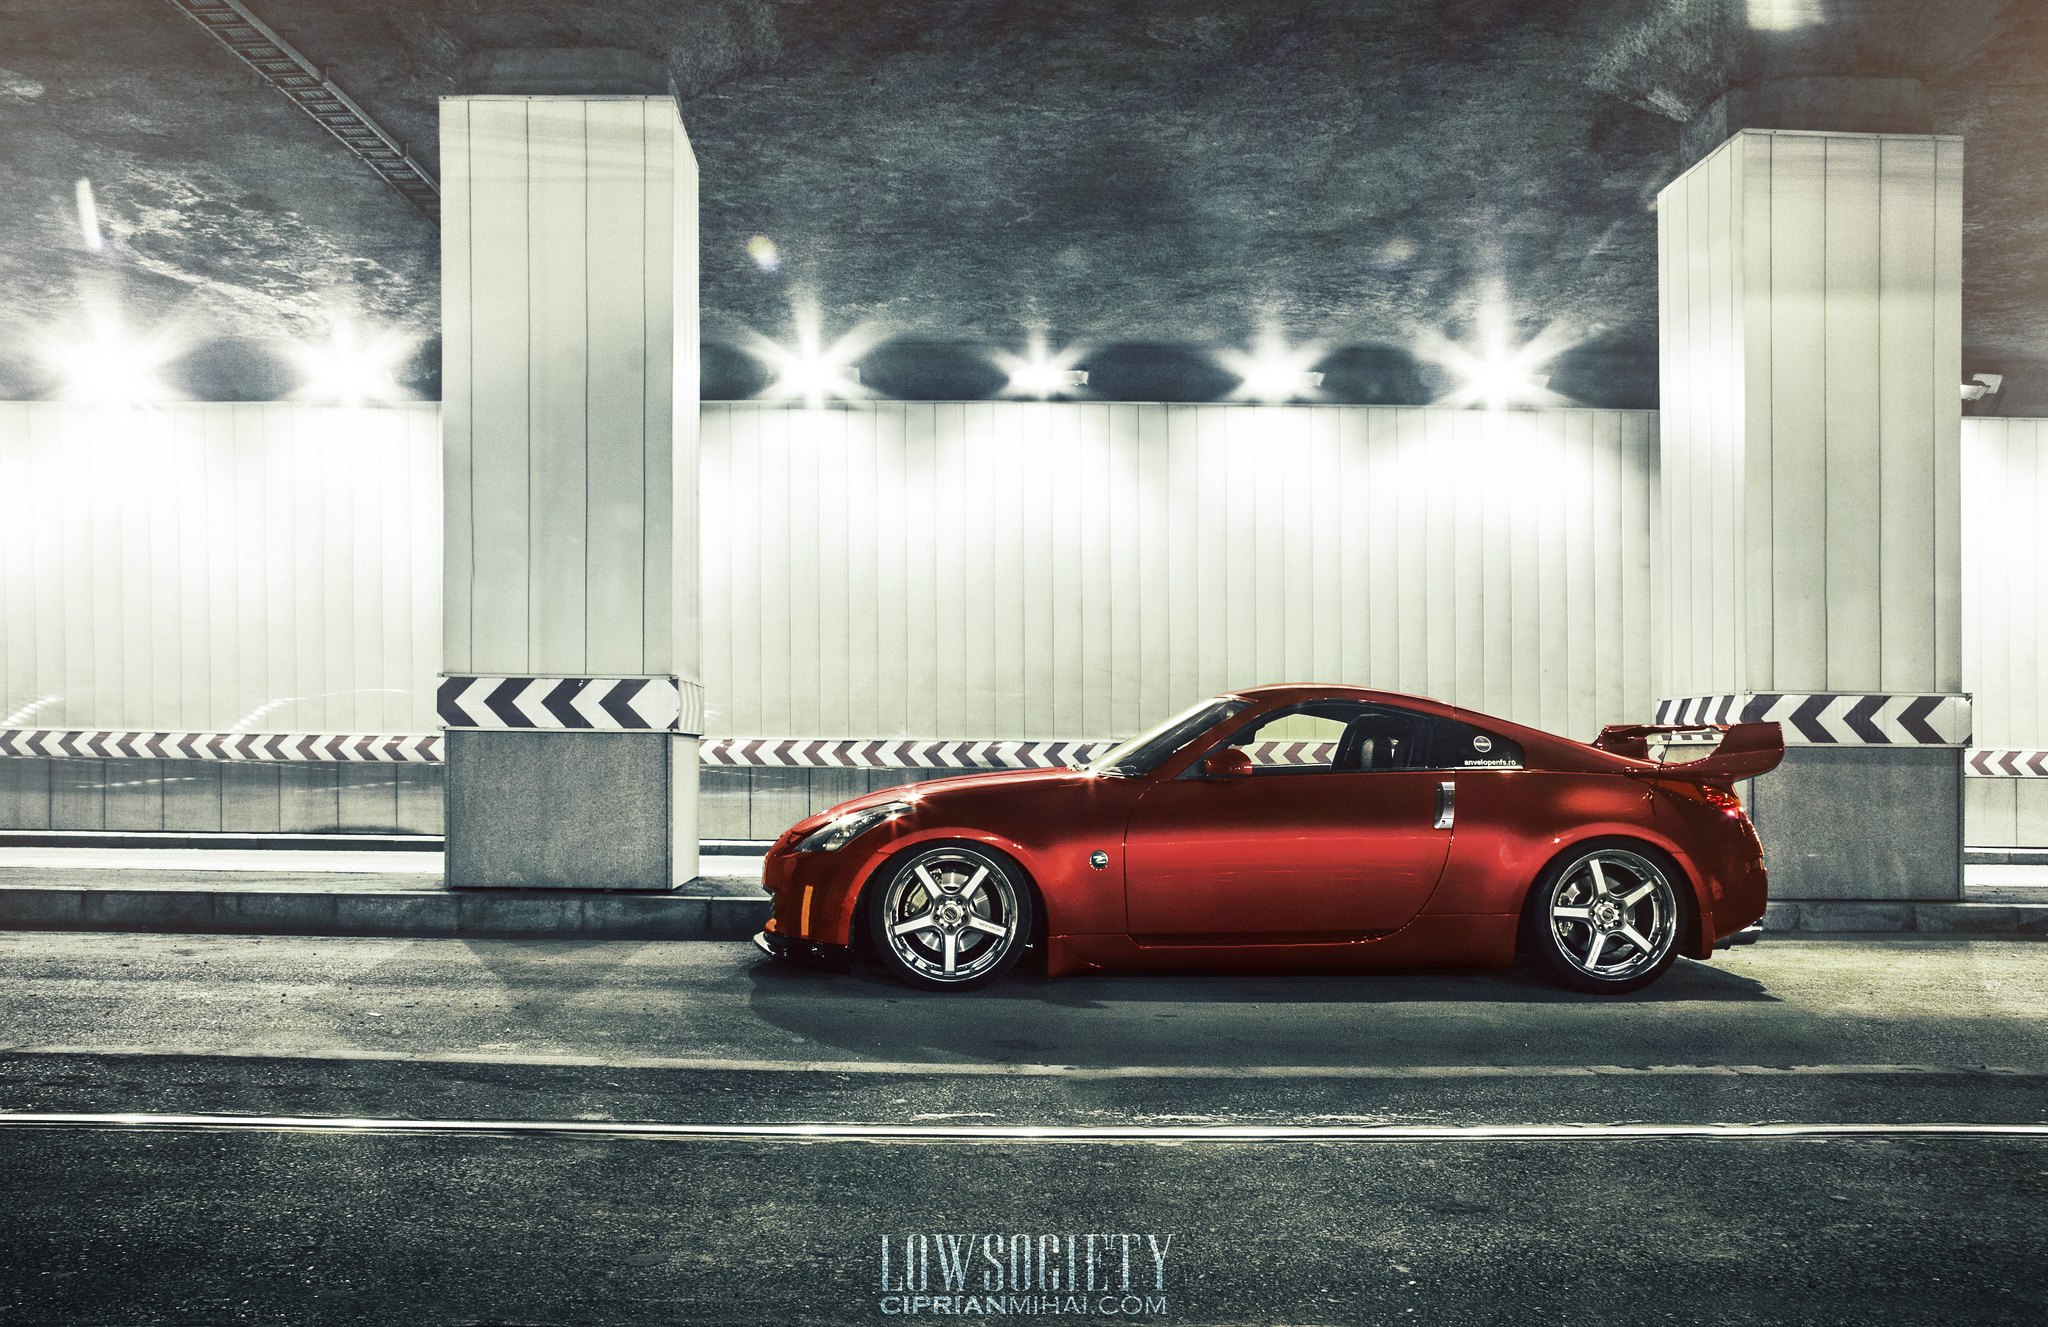 Aftermarket Side Skirts on Red Nissan 350Z - Photo by Ciprian Mihai